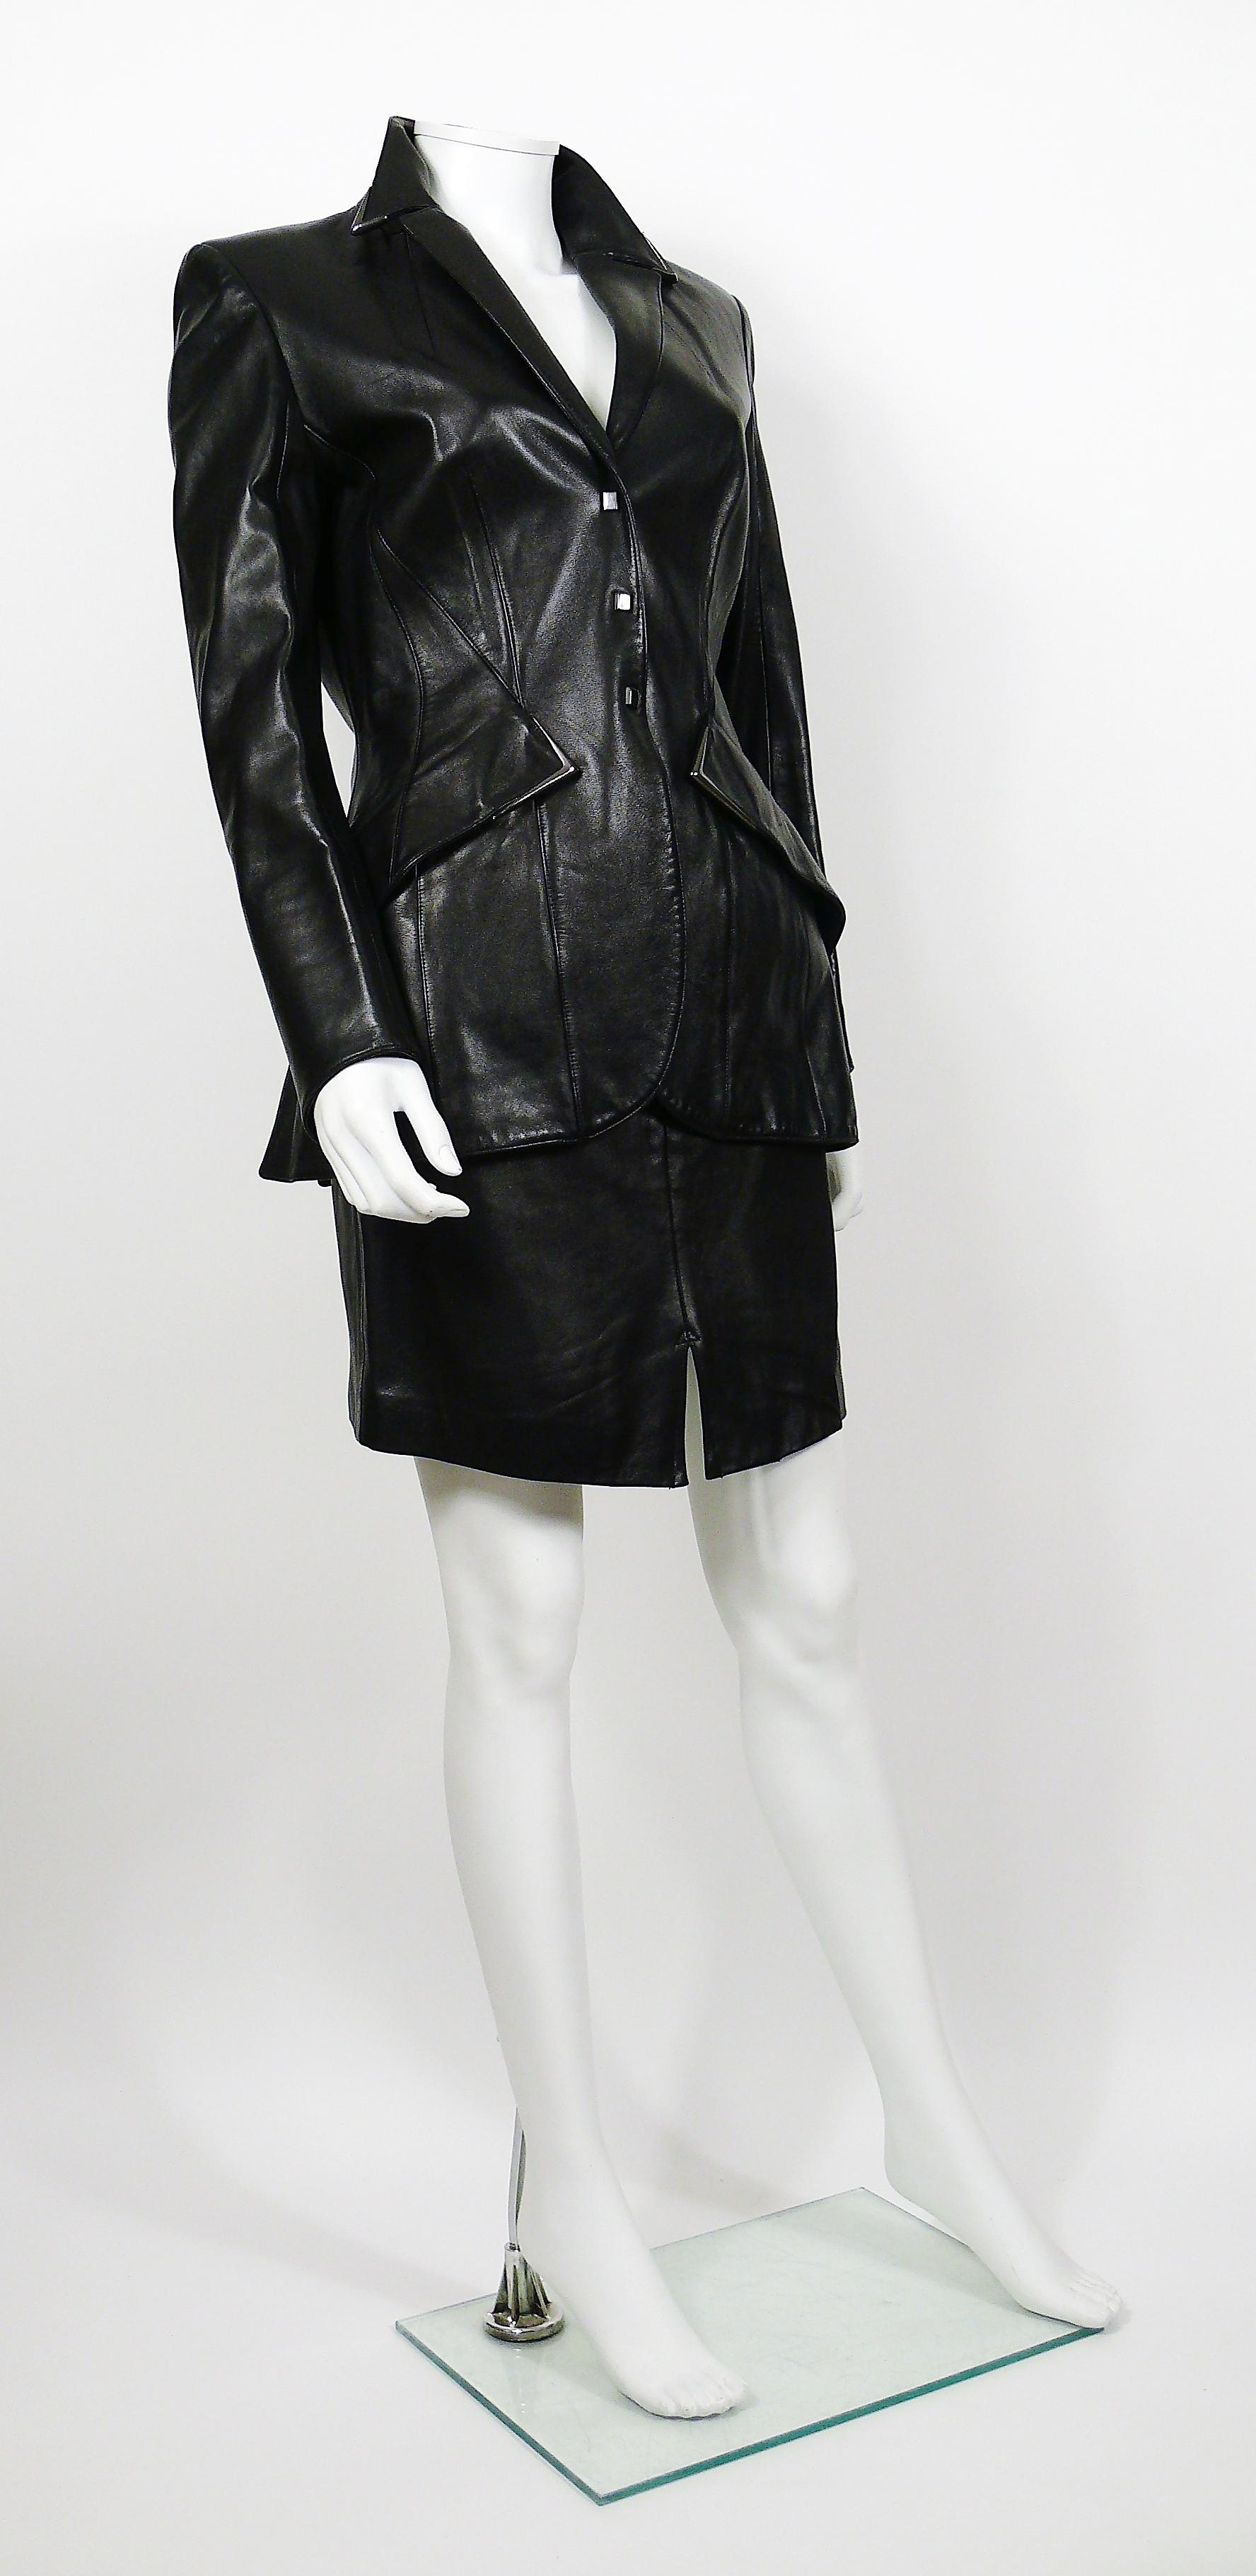 THIERRY MUGLER vintage black lambskin leather skirt and blazer suit.

BLAZER features :
- Tailored fitted cut.
- Front snap buttoning.
- Two pockets.
- Gorgeous metal details on collar and pockets.
- Long sleeves.
- Shoulder pads.
- Fully